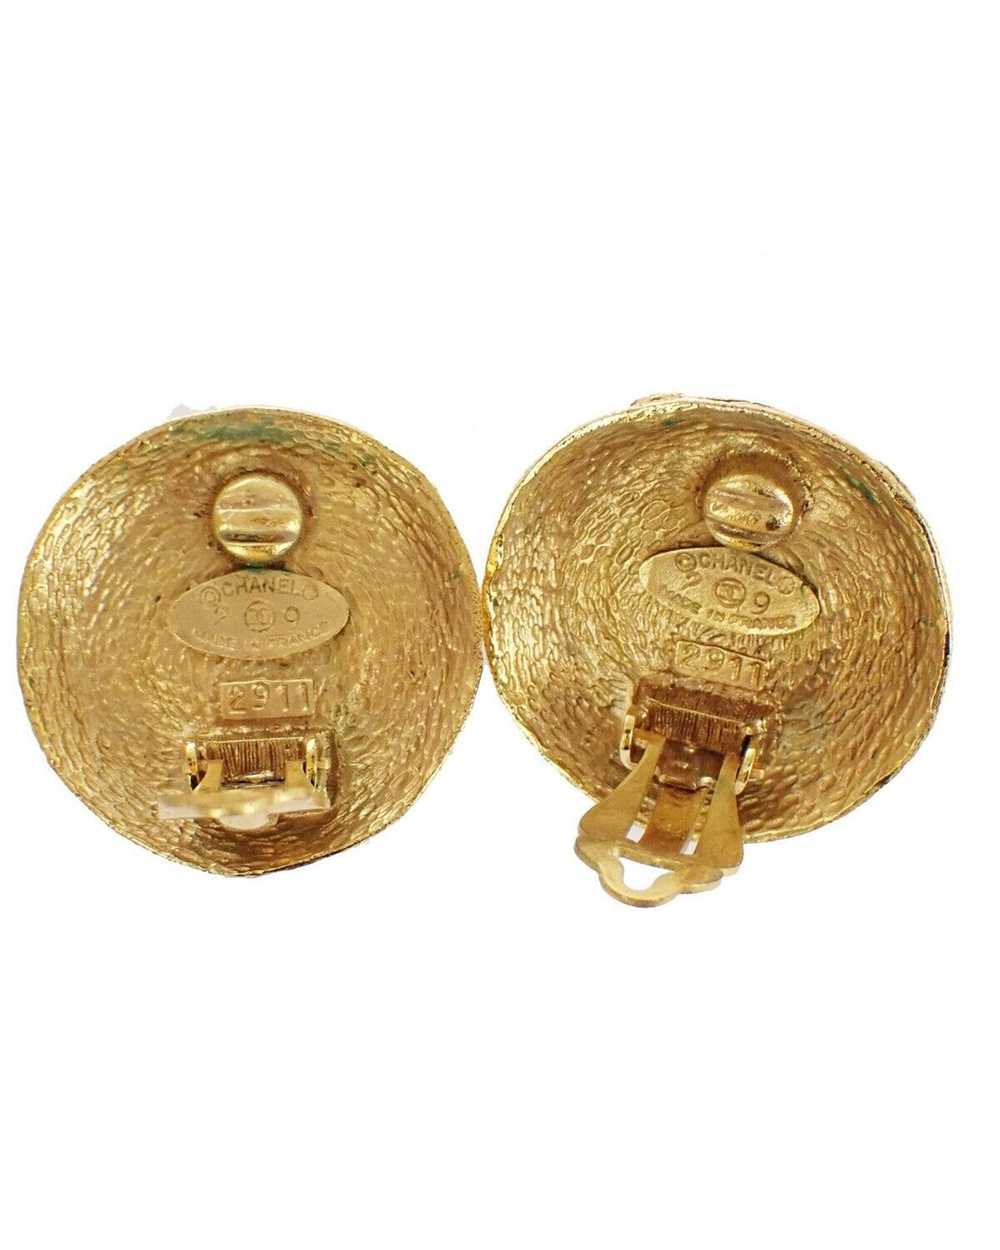 Chanel Coco Mark Button Earrings - image 9